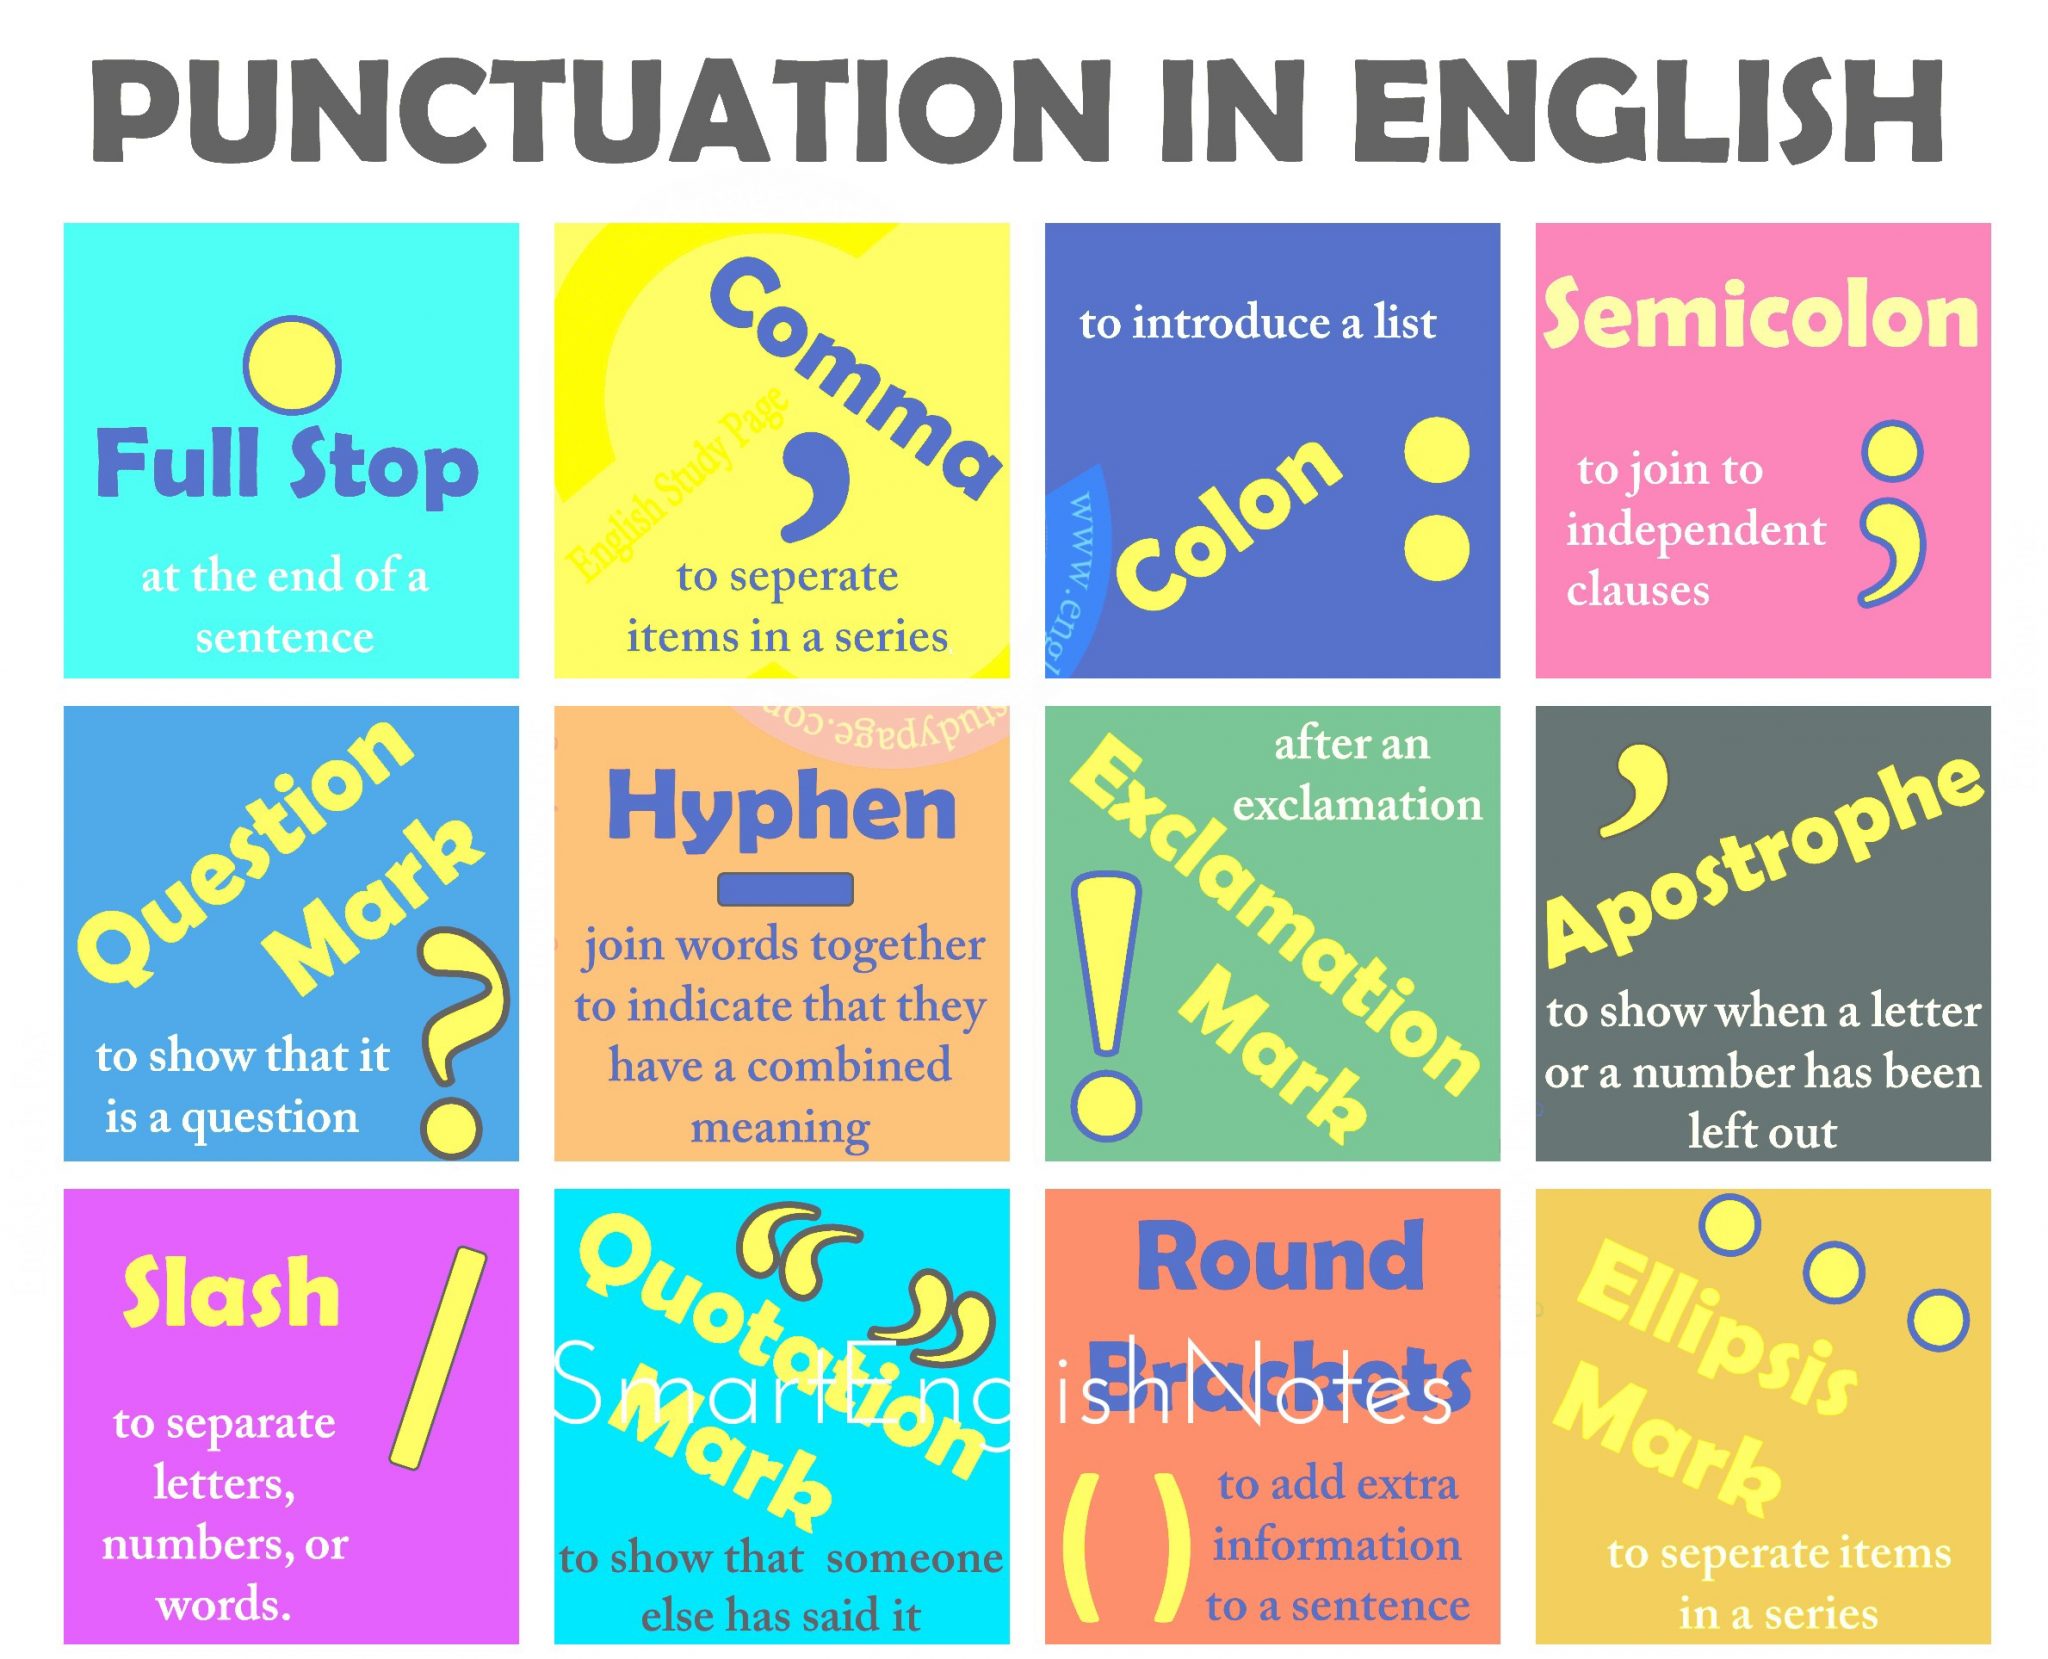 Punctuation: Definition, Types and Usage Rules